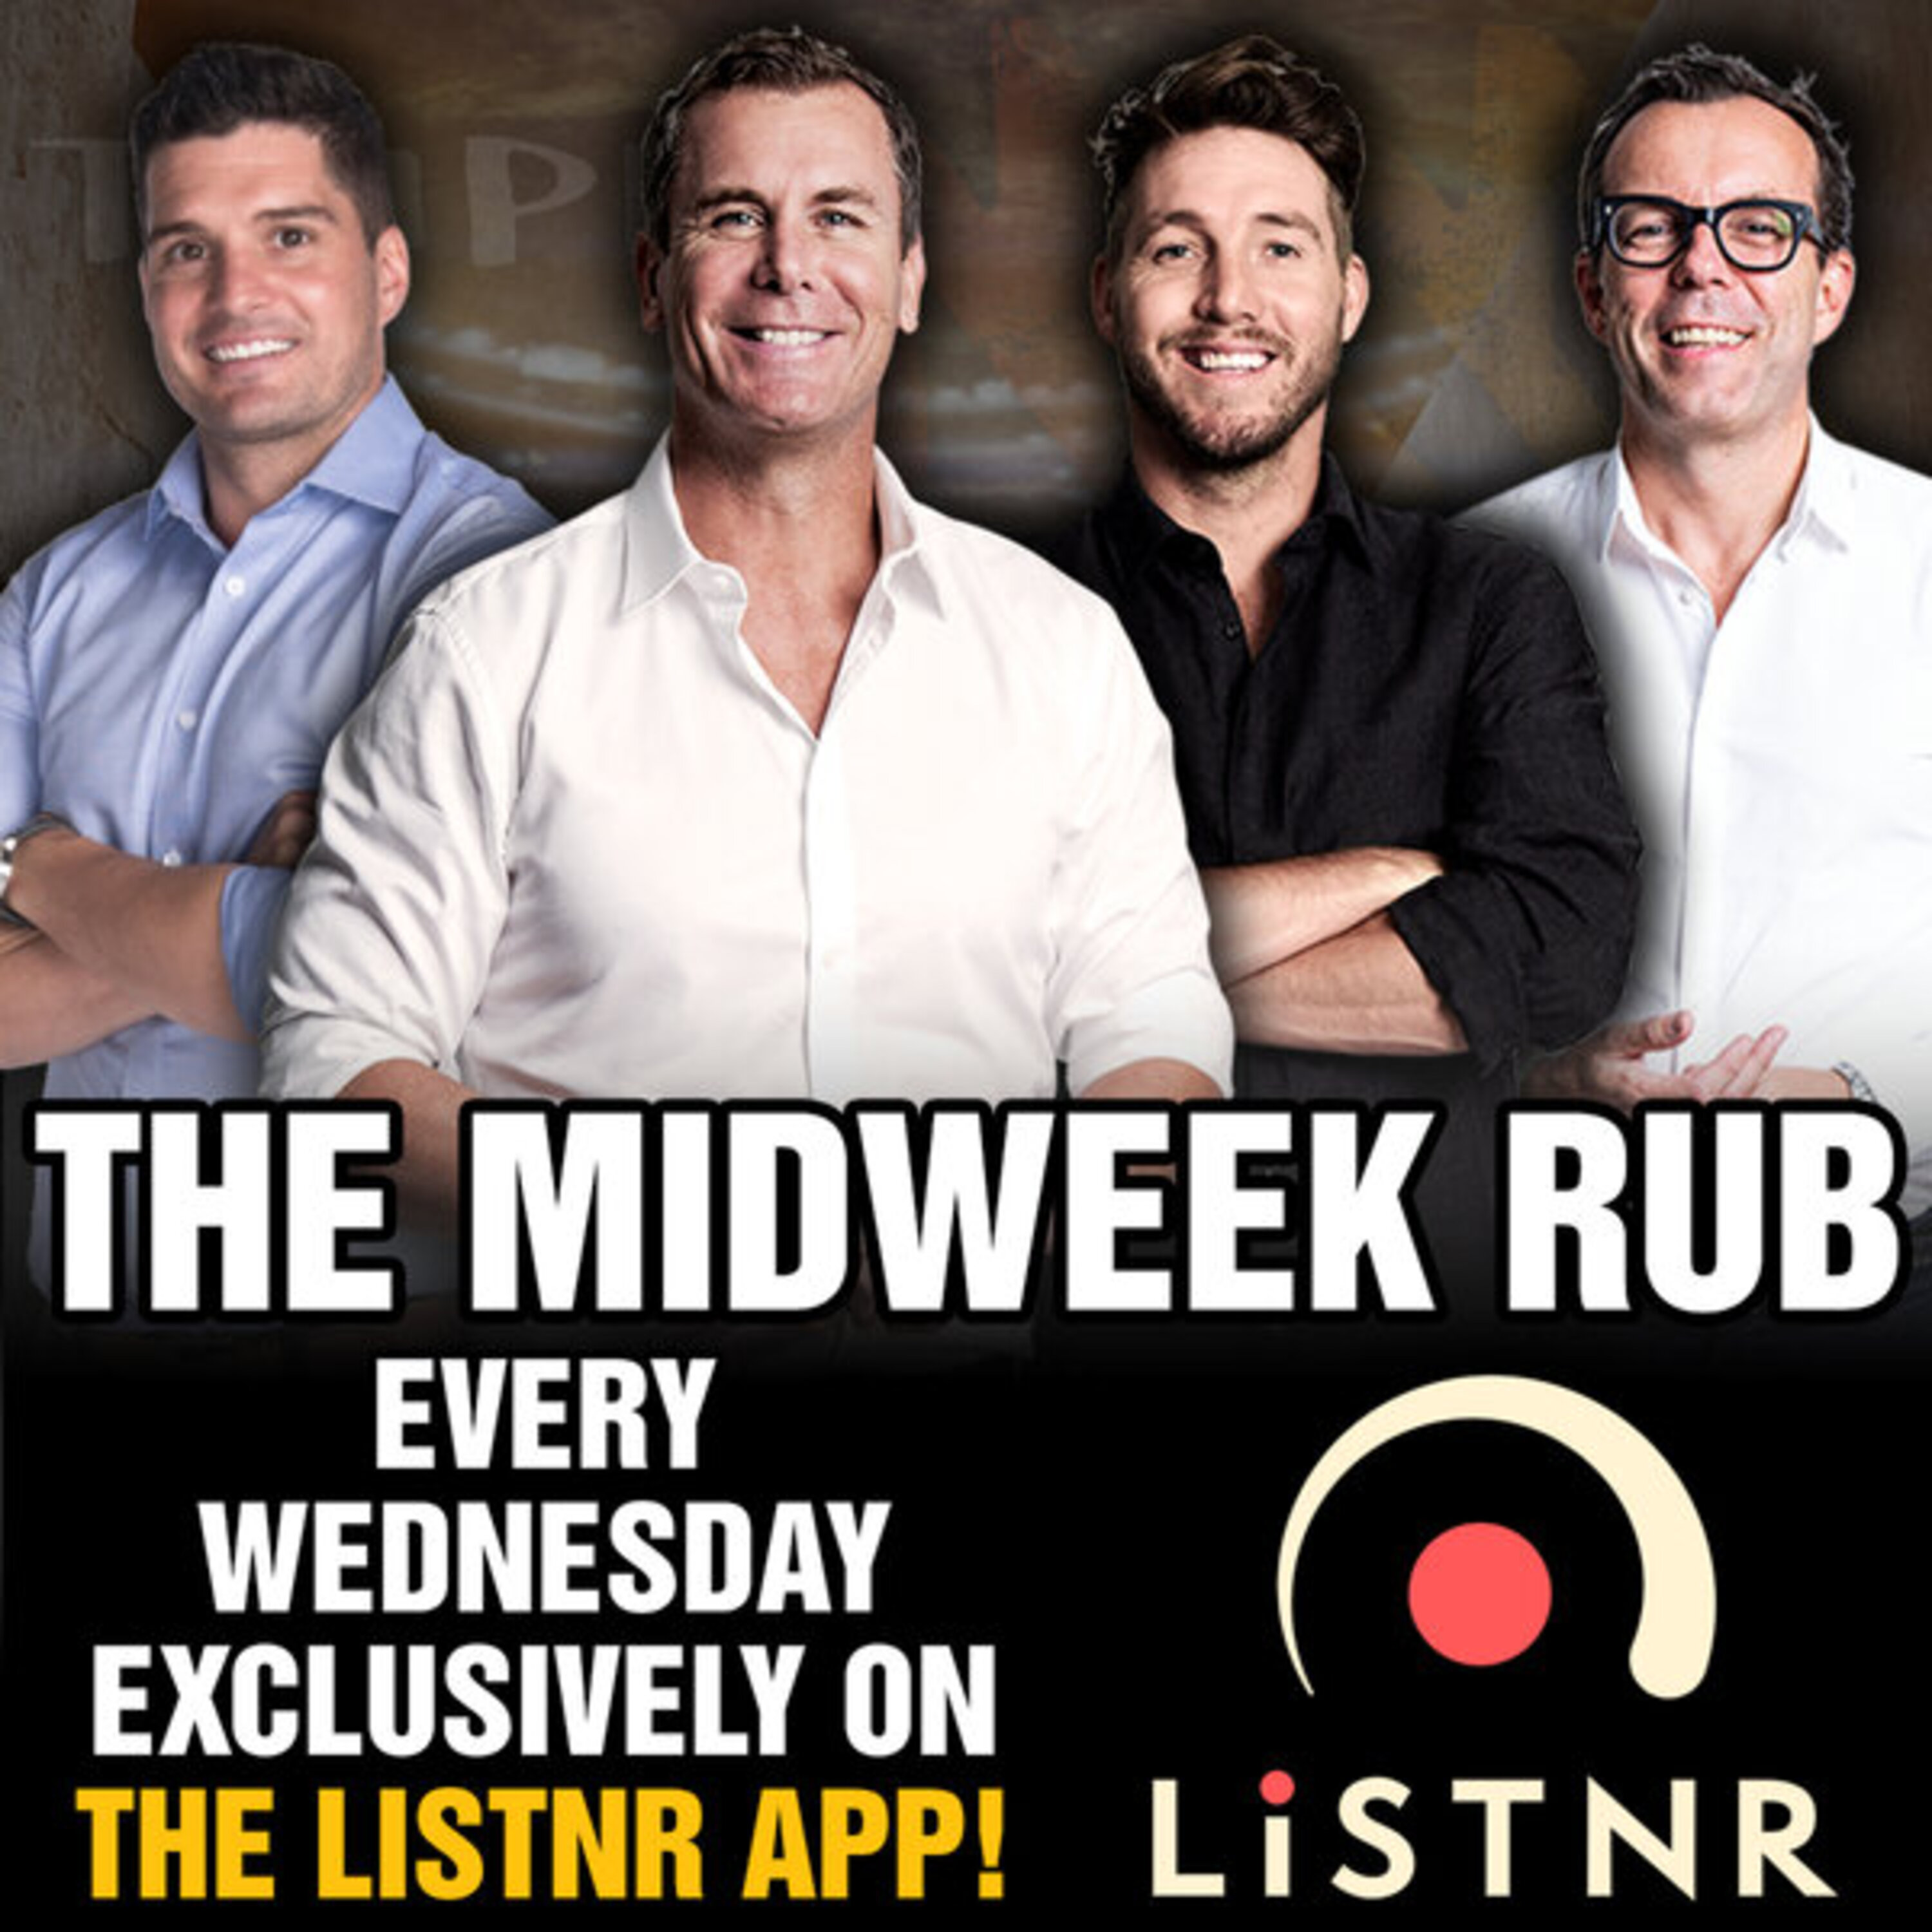 Midweek Rub | David Noble's spray, can Carlton make a prelim, who are Melbourne's top 5 players?